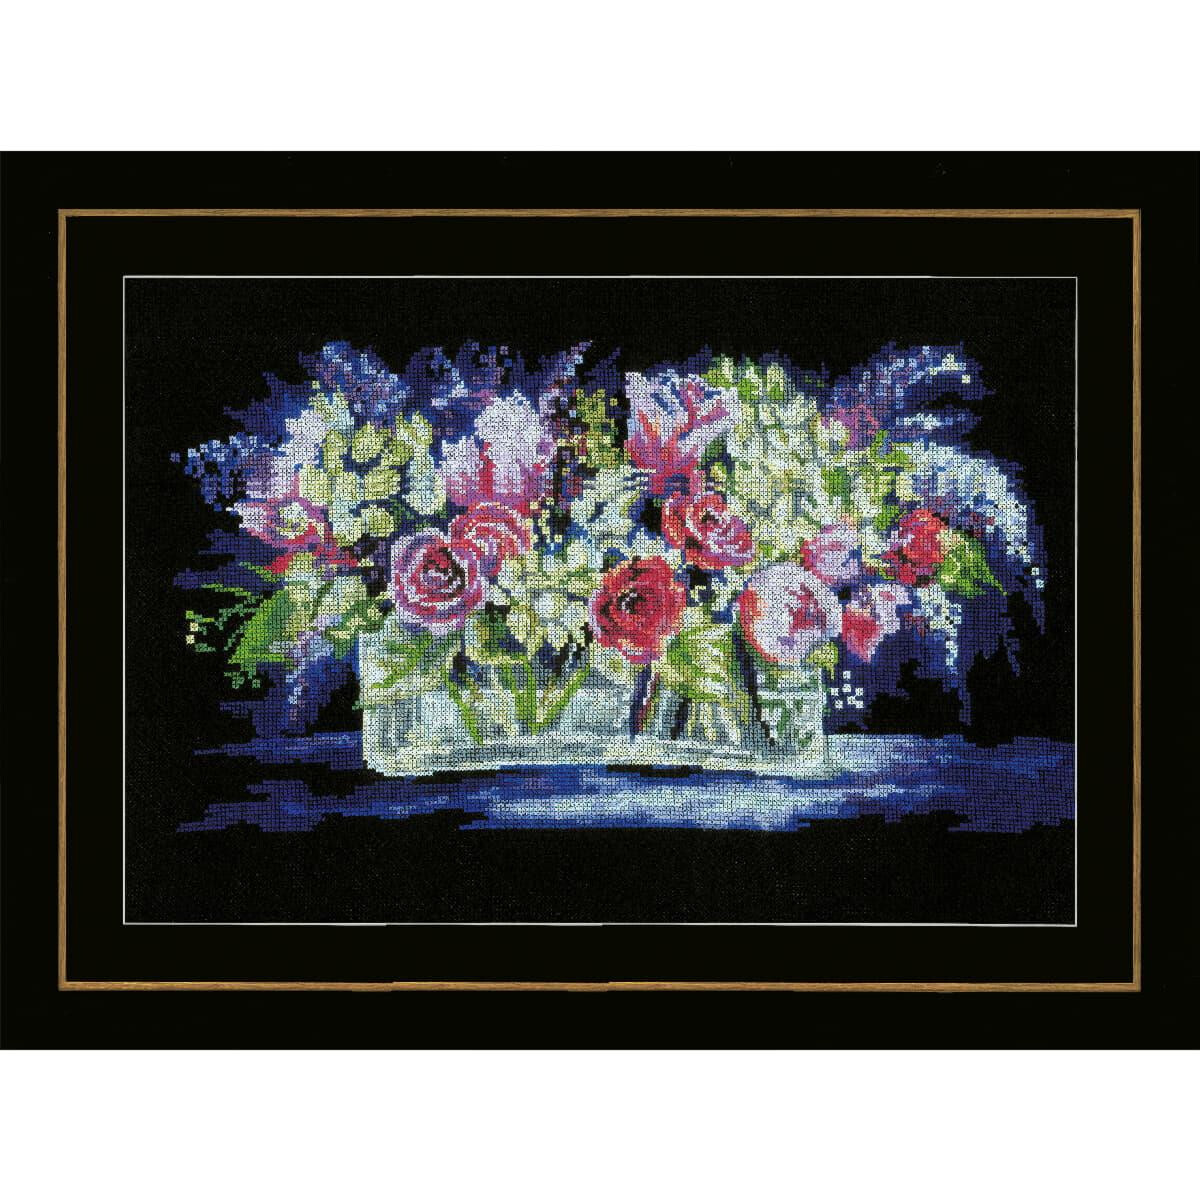 Lanarte counted cross stitch kit "Roses and...